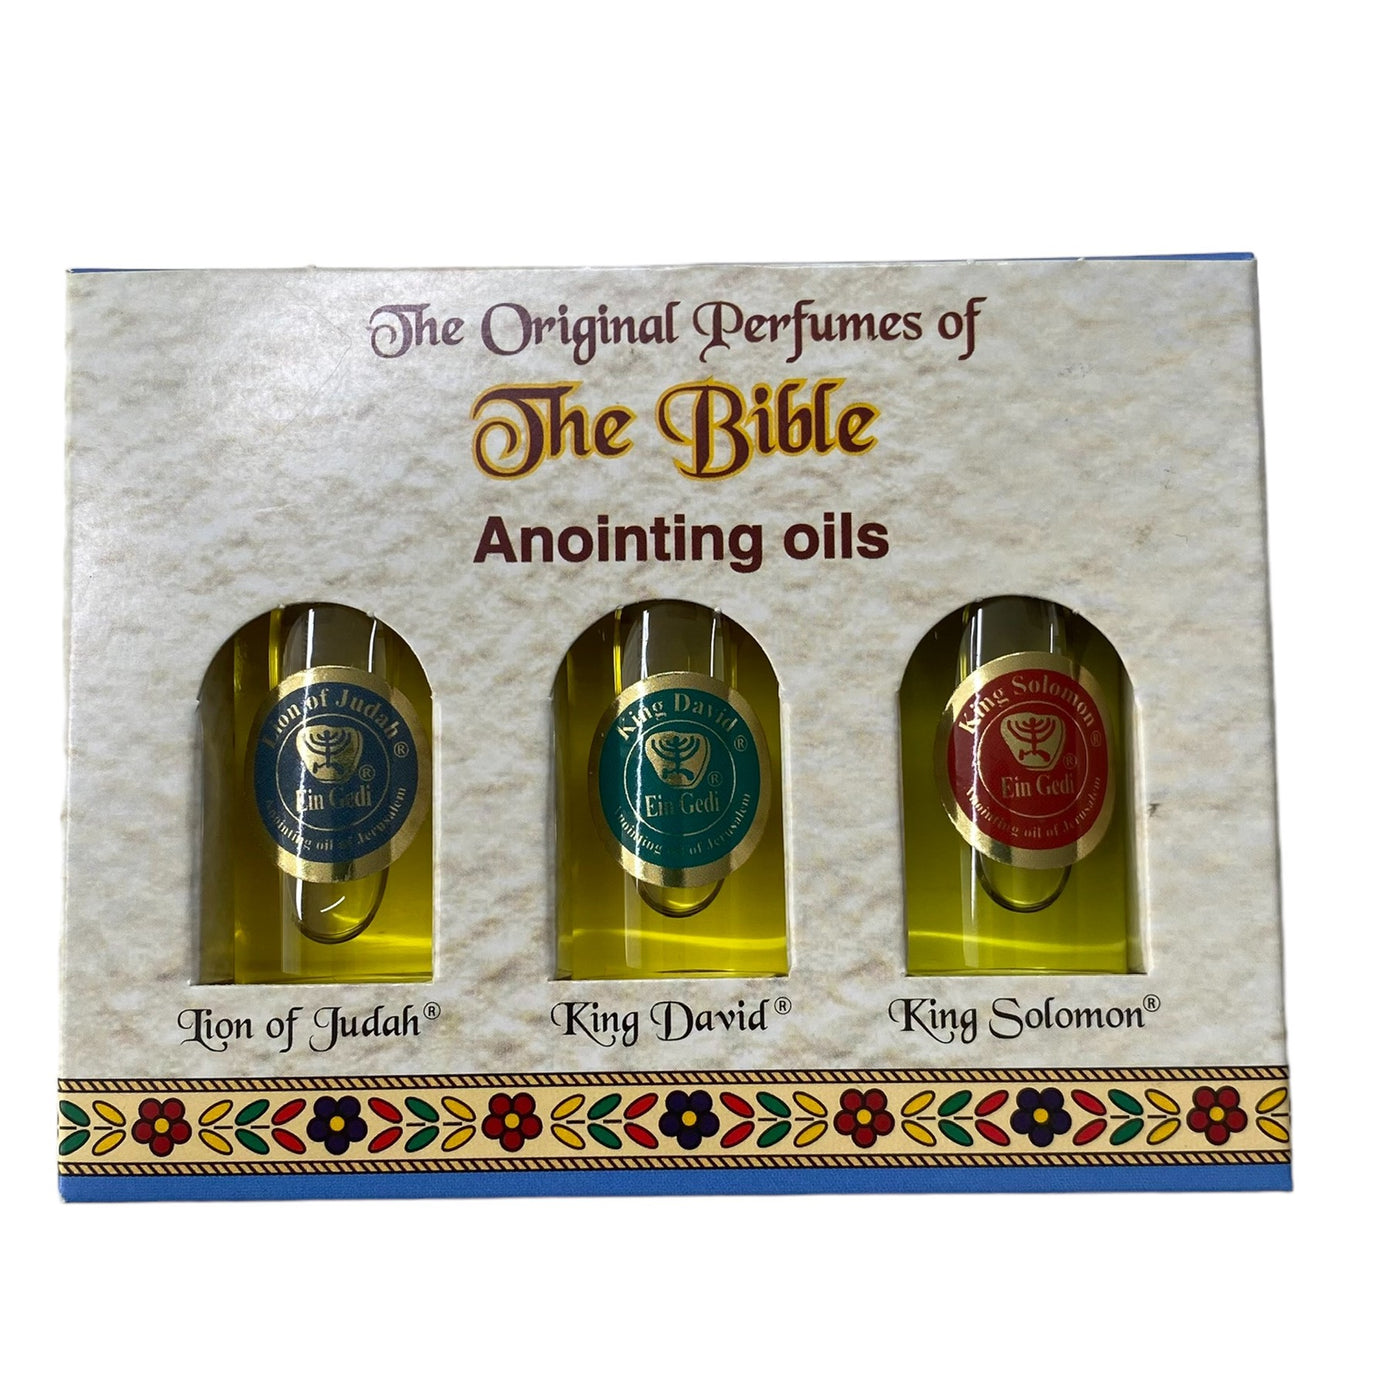 The Original Perfumes of The Bible Trio Pack anoiting Oil from Holyland Jerusalem (King)